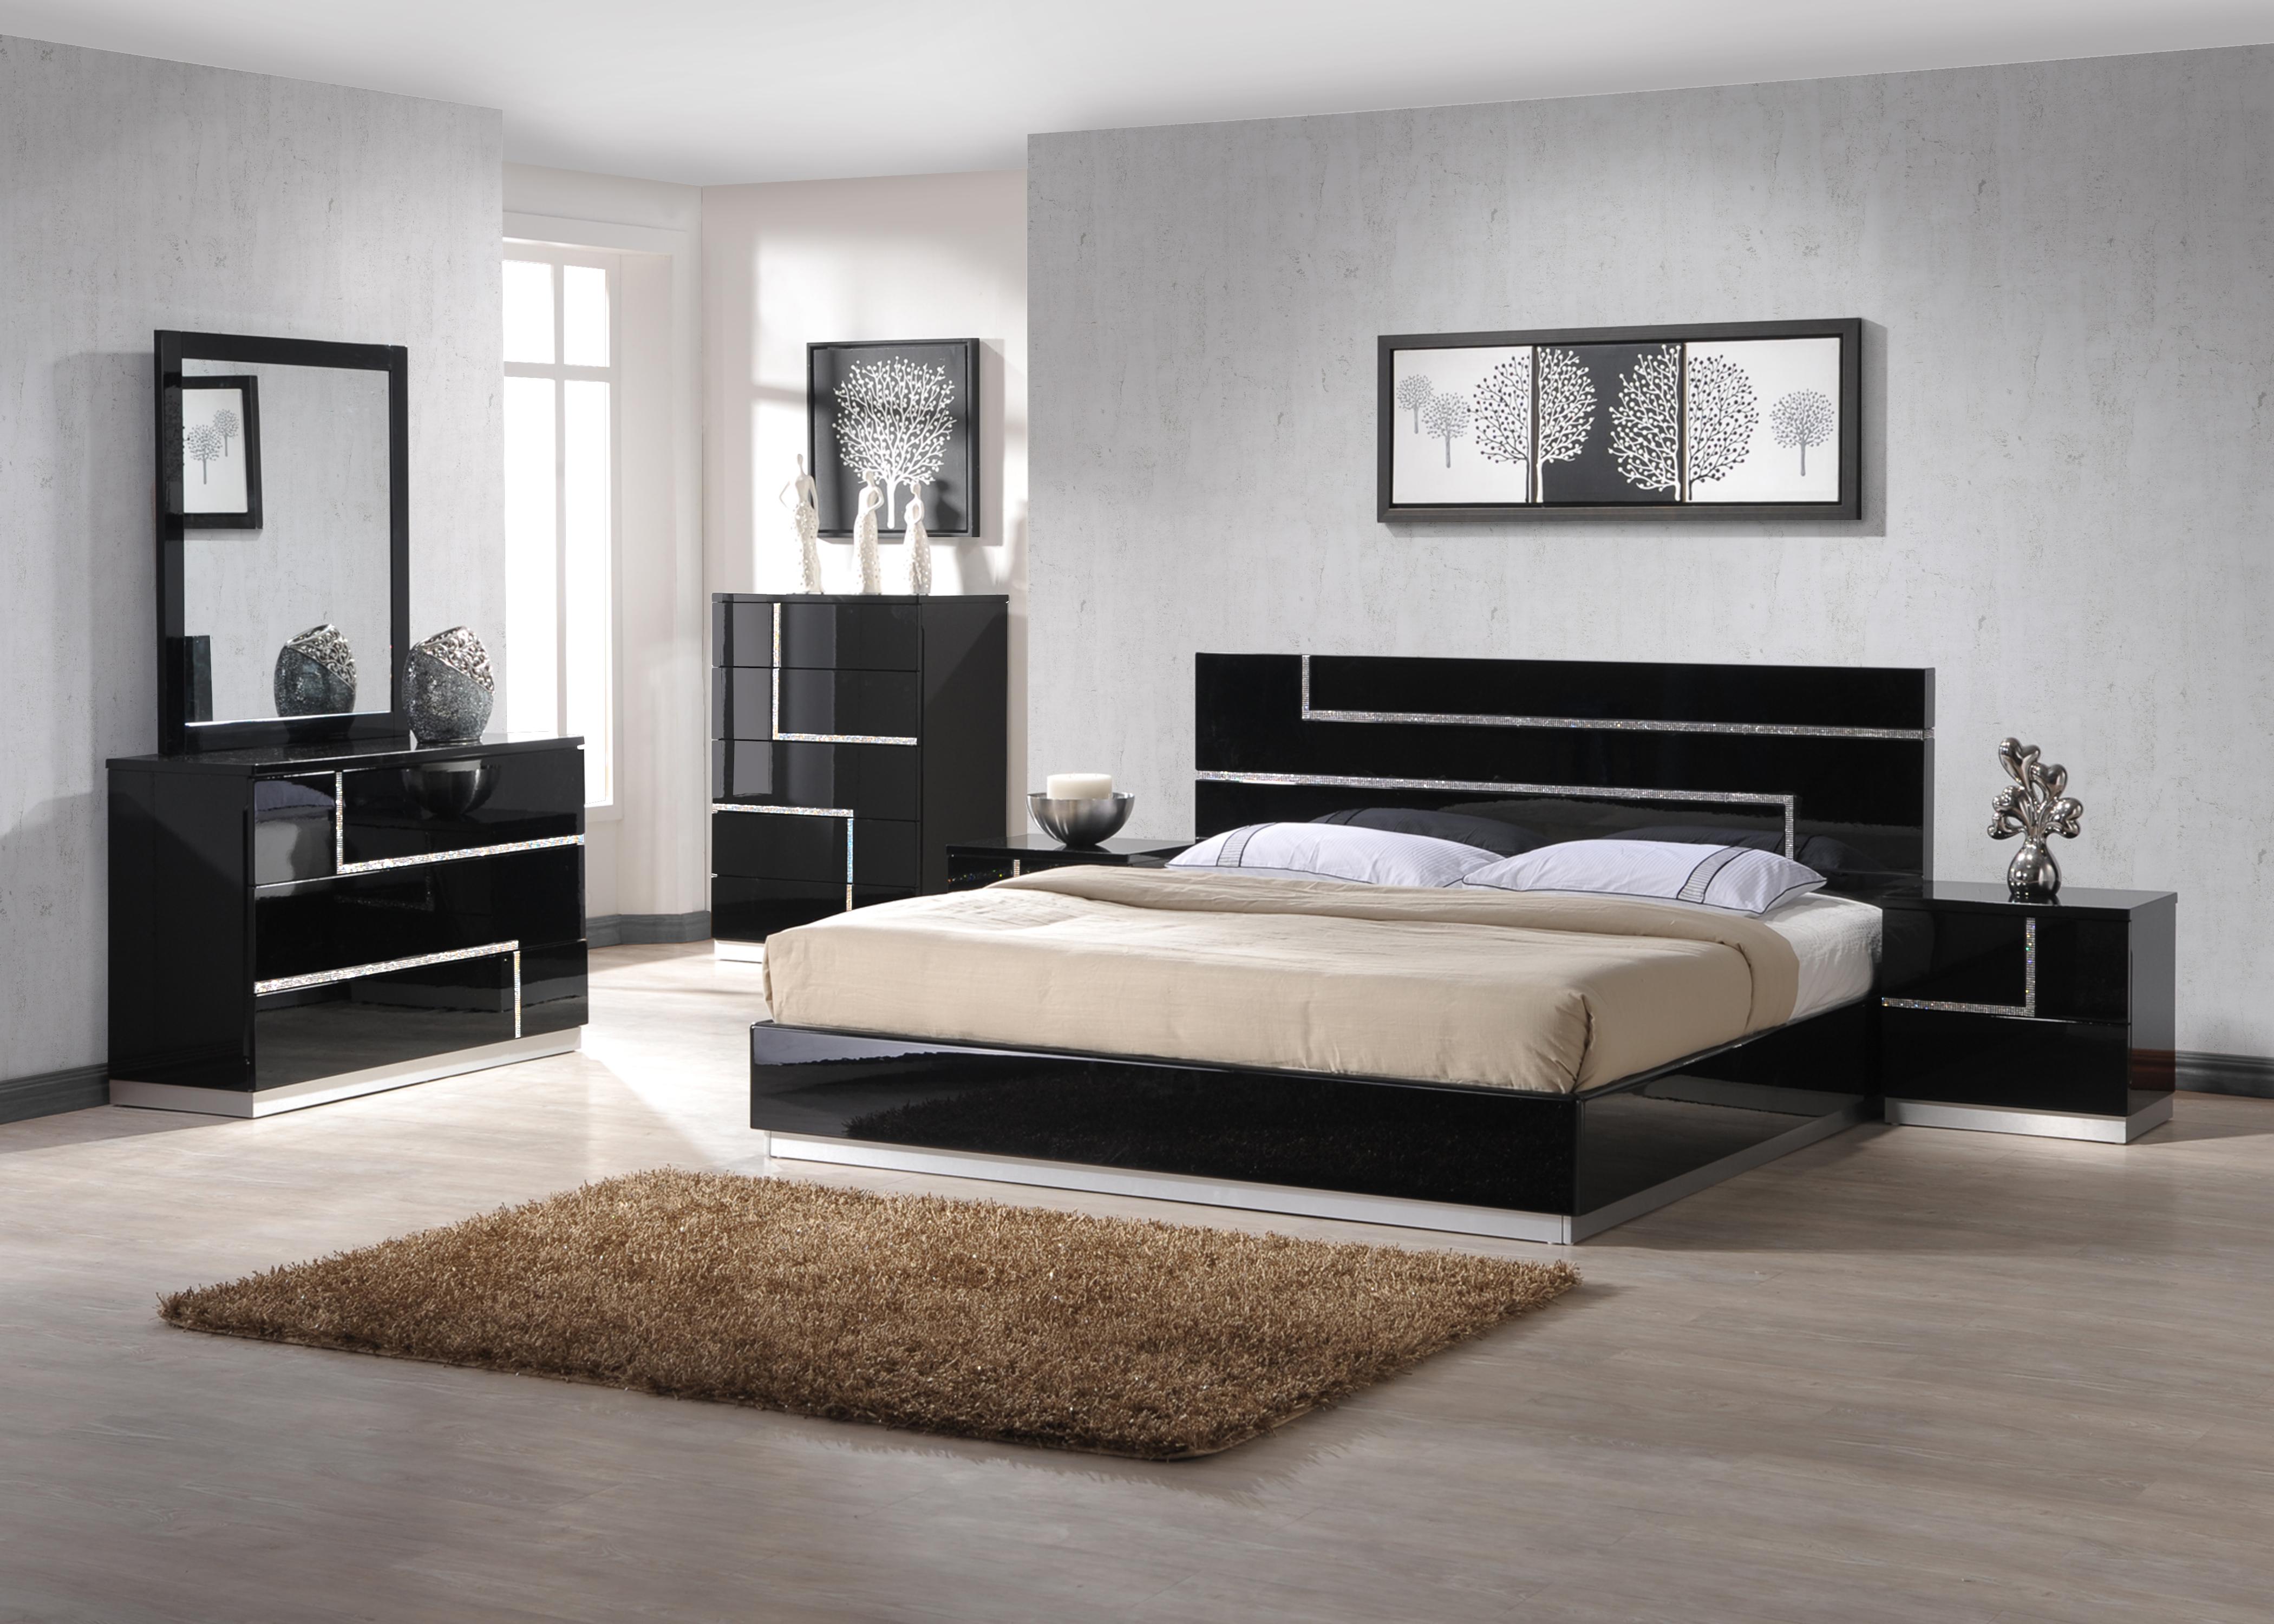 

    
Luxury Black Lacquer With Crystal Accents Queen Bedroom Set 3Pcs J&M Lucca
